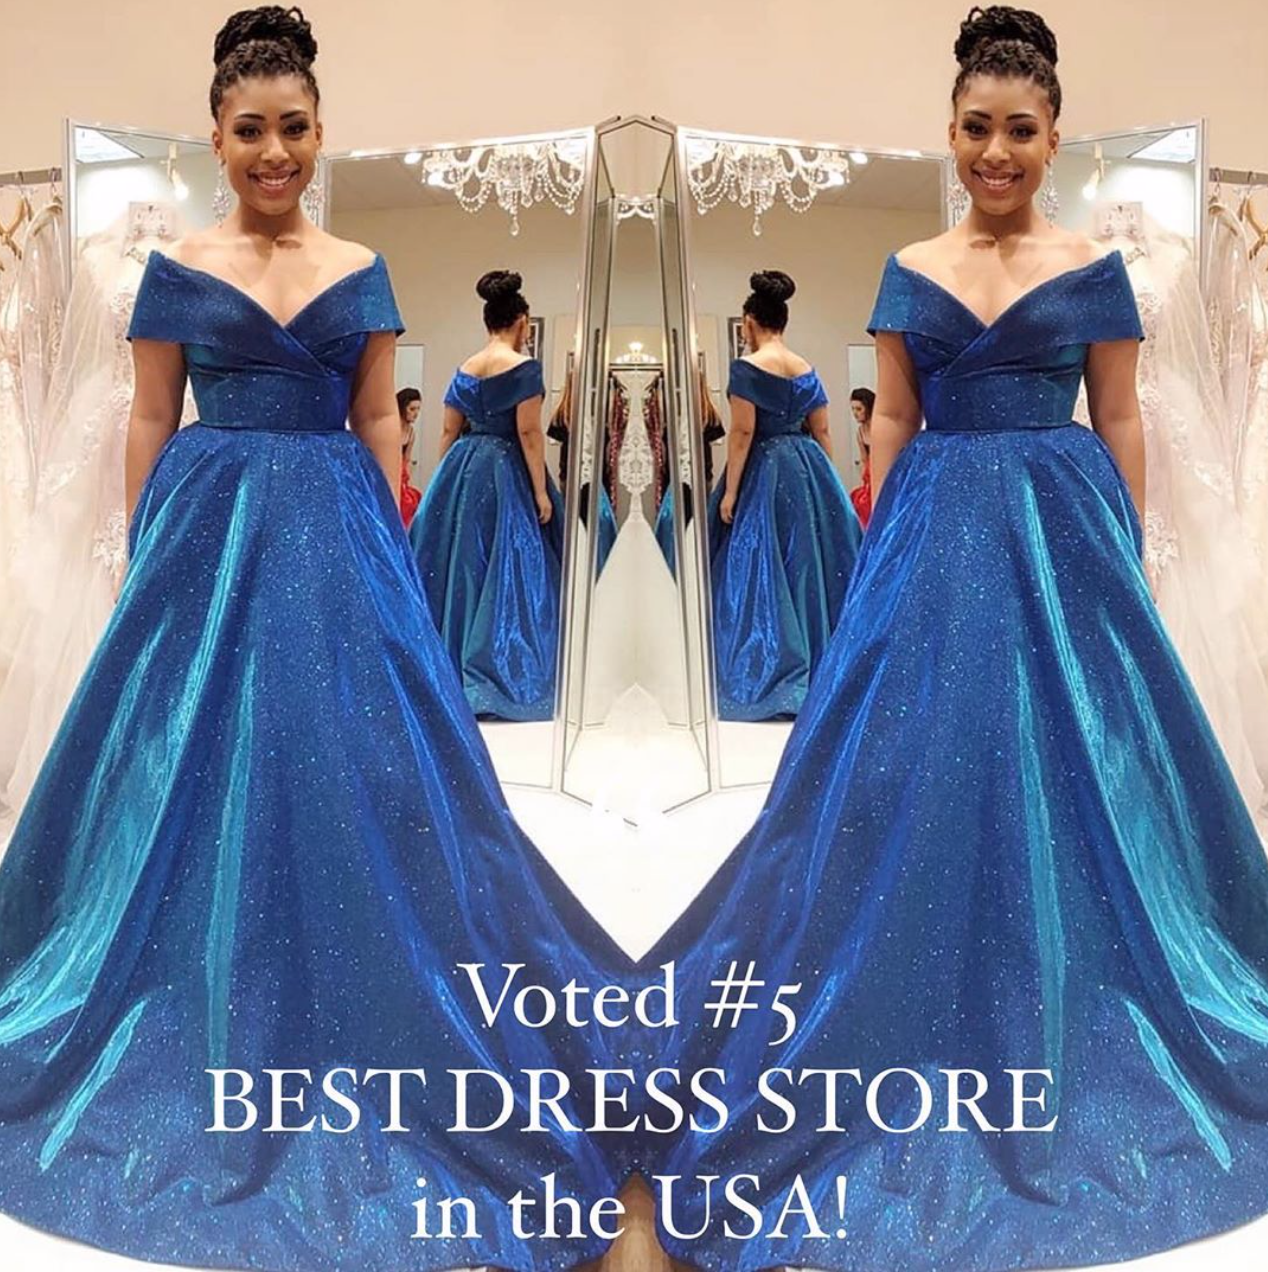 Congratulations to us! Foxy Lady voted #5 BEST DRESS STORE on Pageant Planet's Top 10 list for 2019!